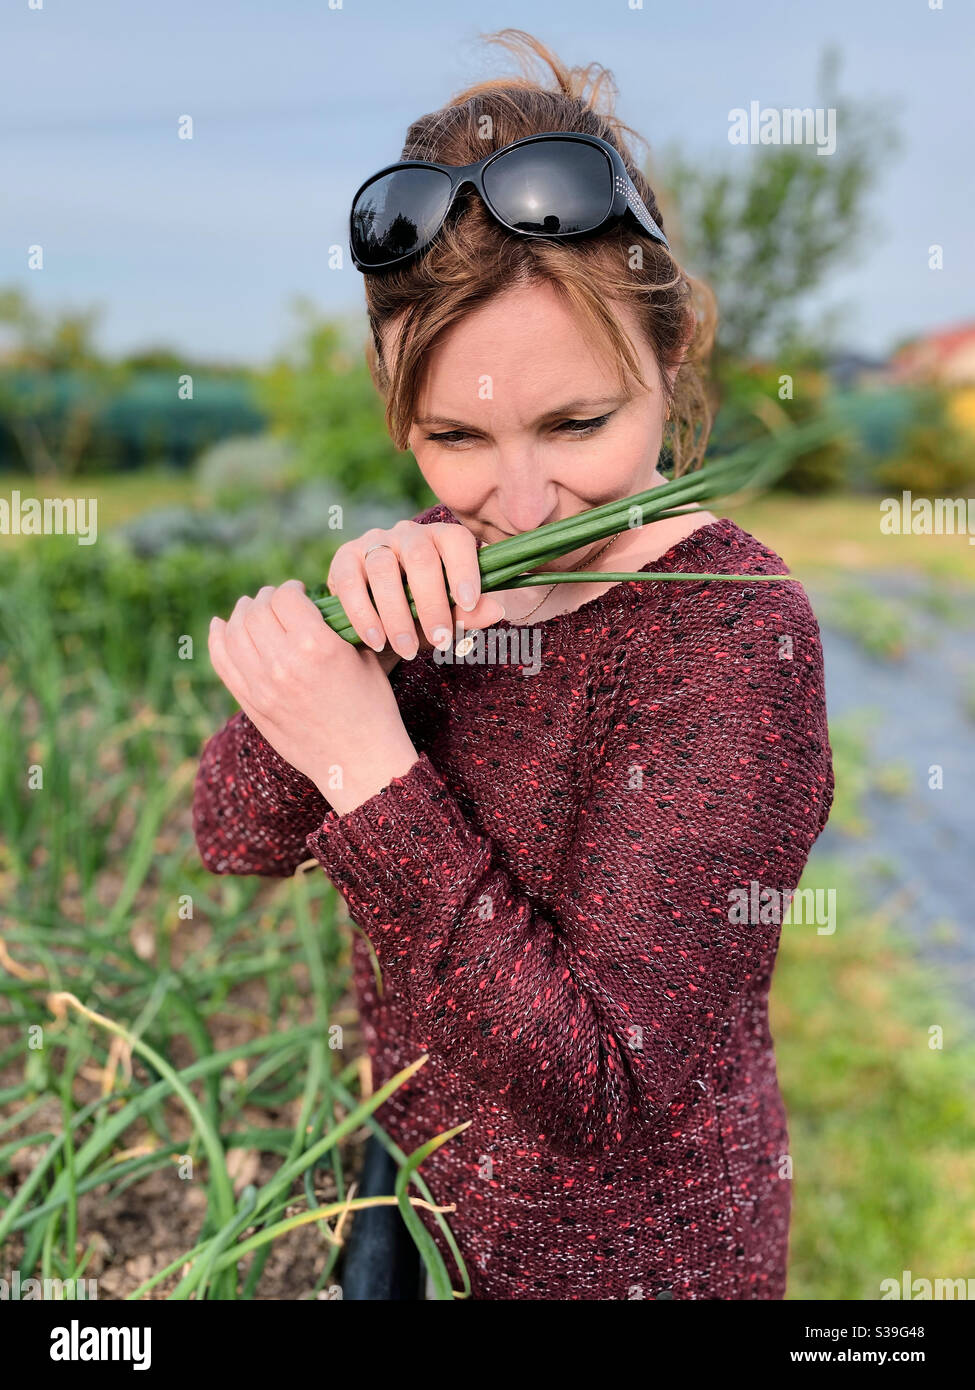 Woman picking the vegetables, working in a home garden in the backyard. Candid people, real moments, authentic situations Stock Photo